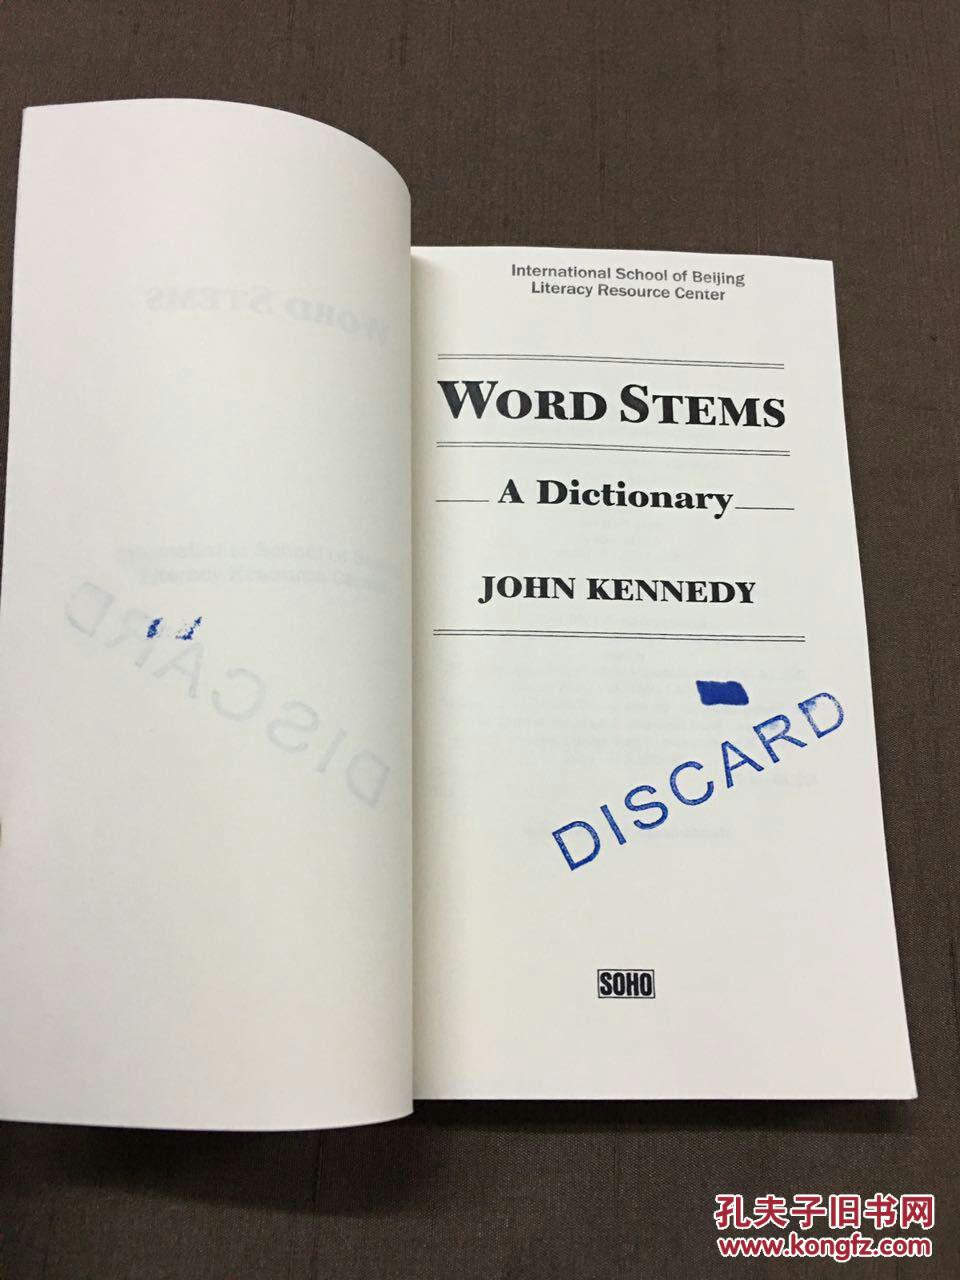 Word Stems: A Dictionary【英文】